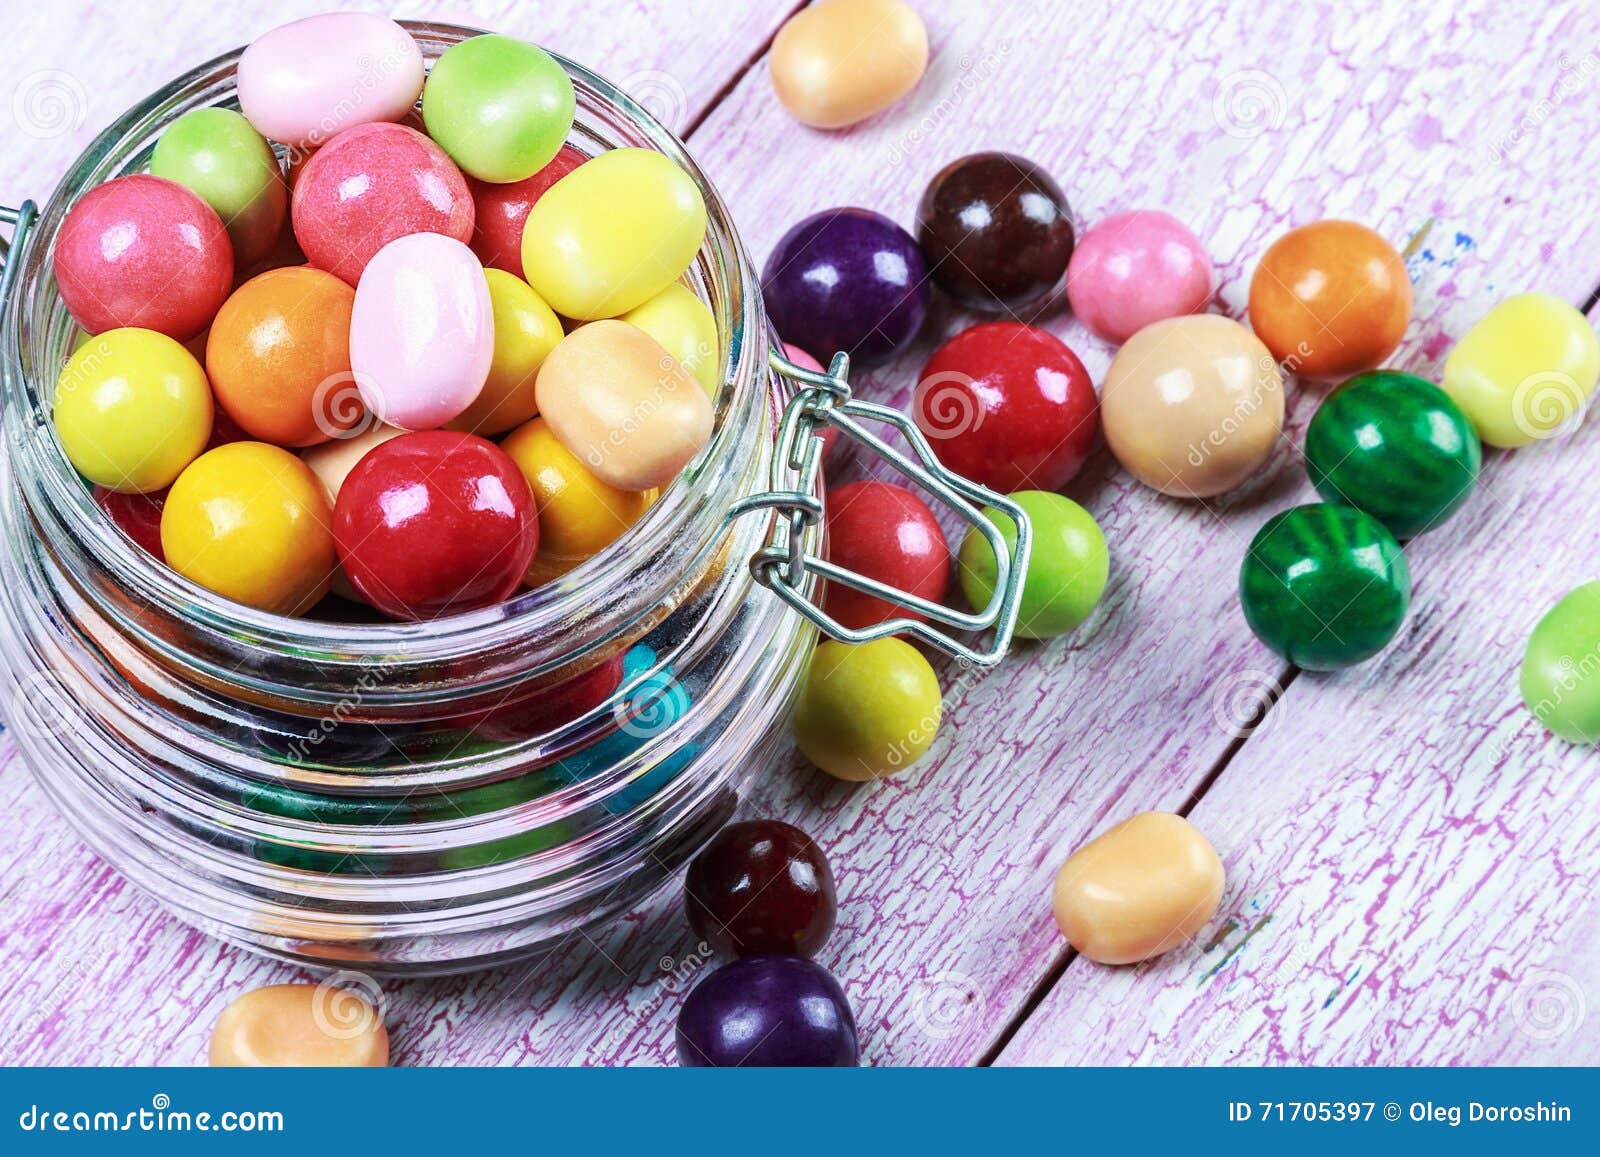 Colorful Candies And Lollipops In A Jar On Wooden Stock Image - Image ...